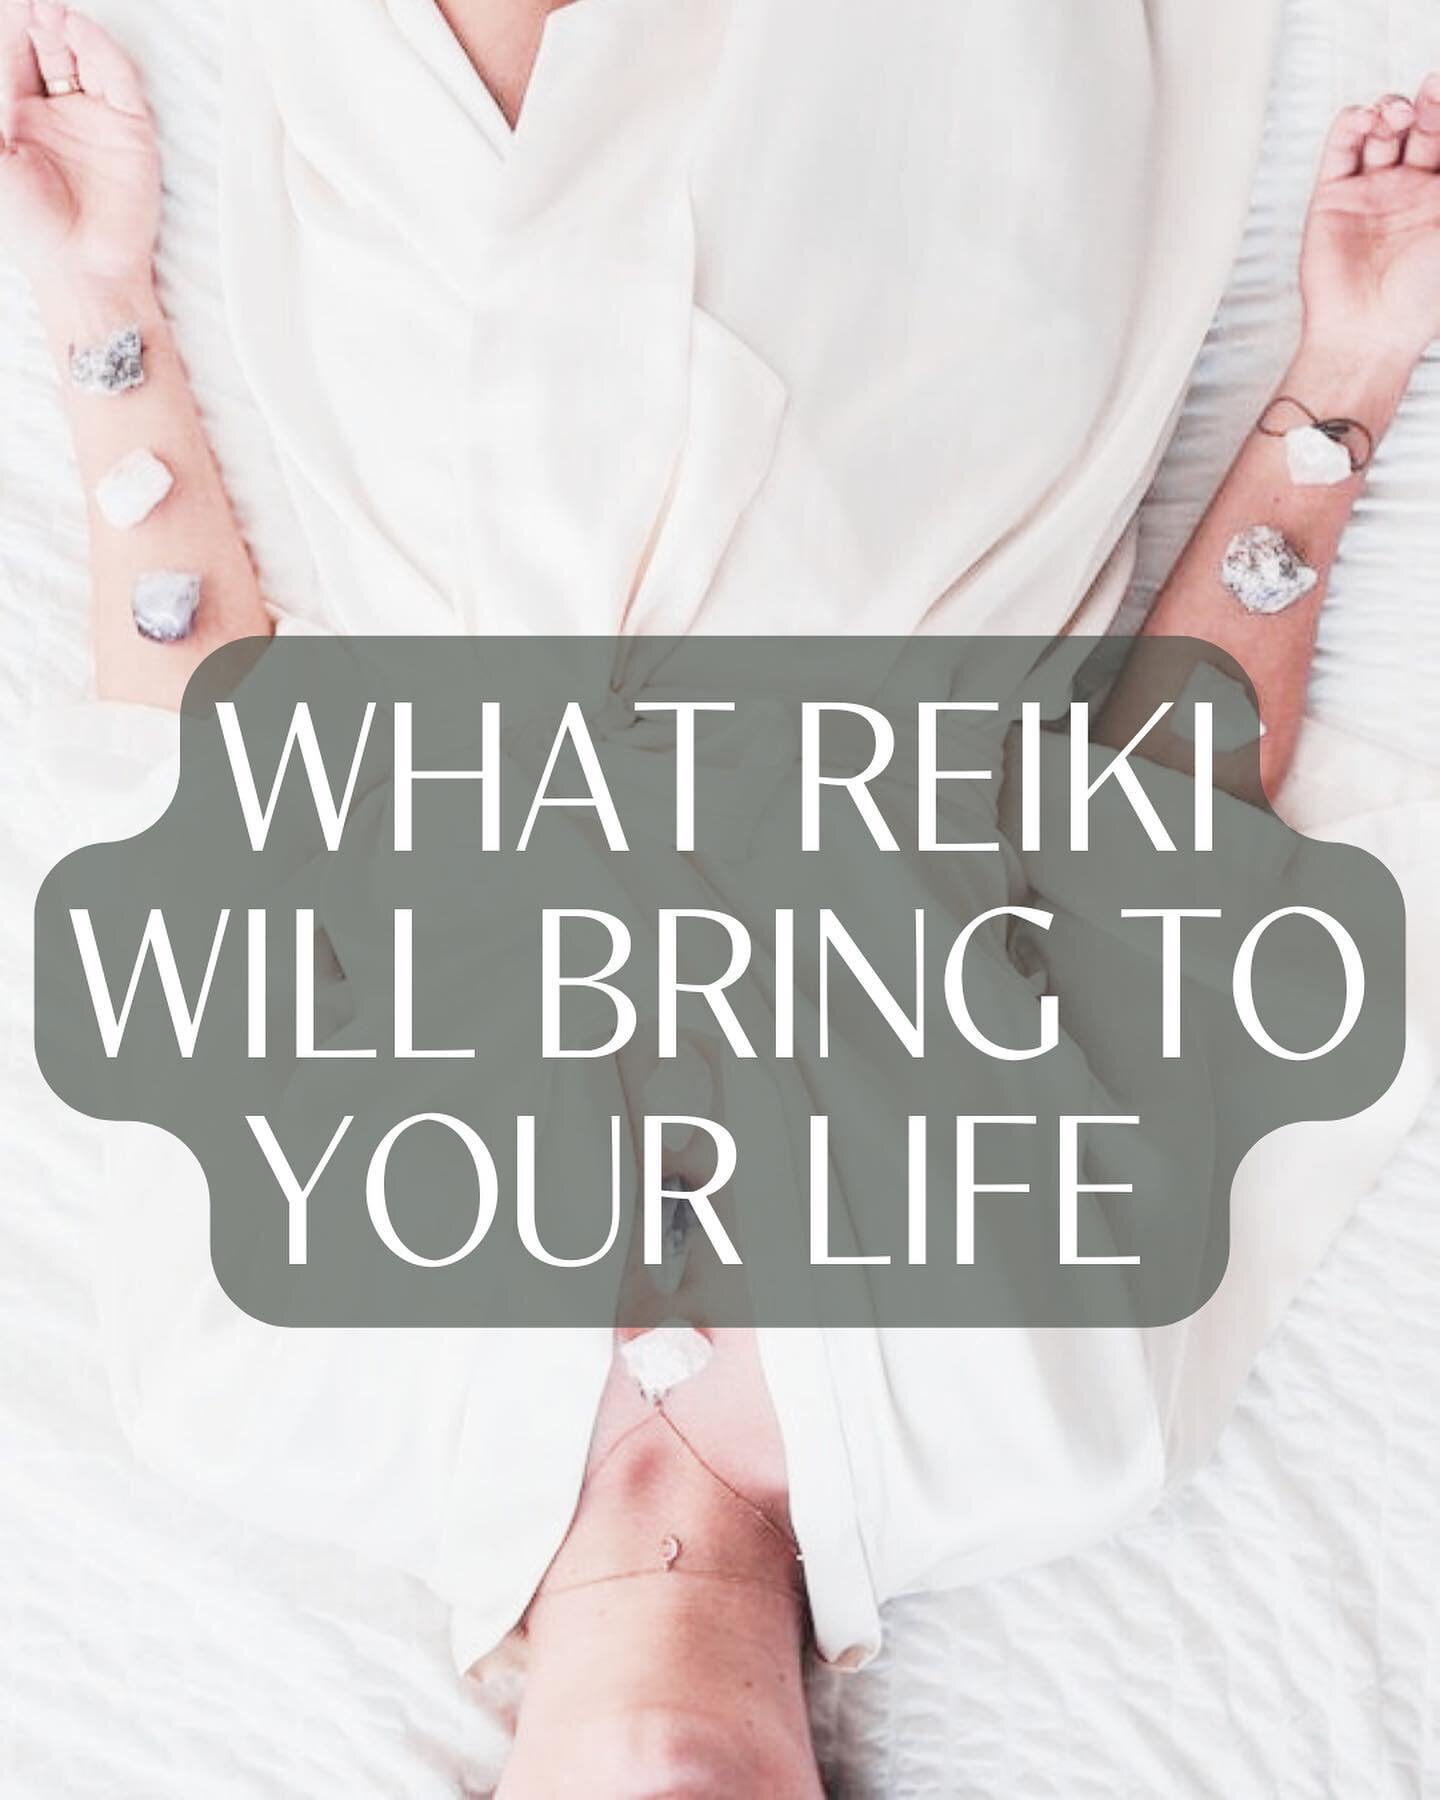 What Reiki WILL bring to your life ✨

1️⃣ On a personal level:

During the weekend you will be immersed in a deep level of personal development, personal healing and strengthening your own intuition. You will learn tool to heal, protect, cleanse and 